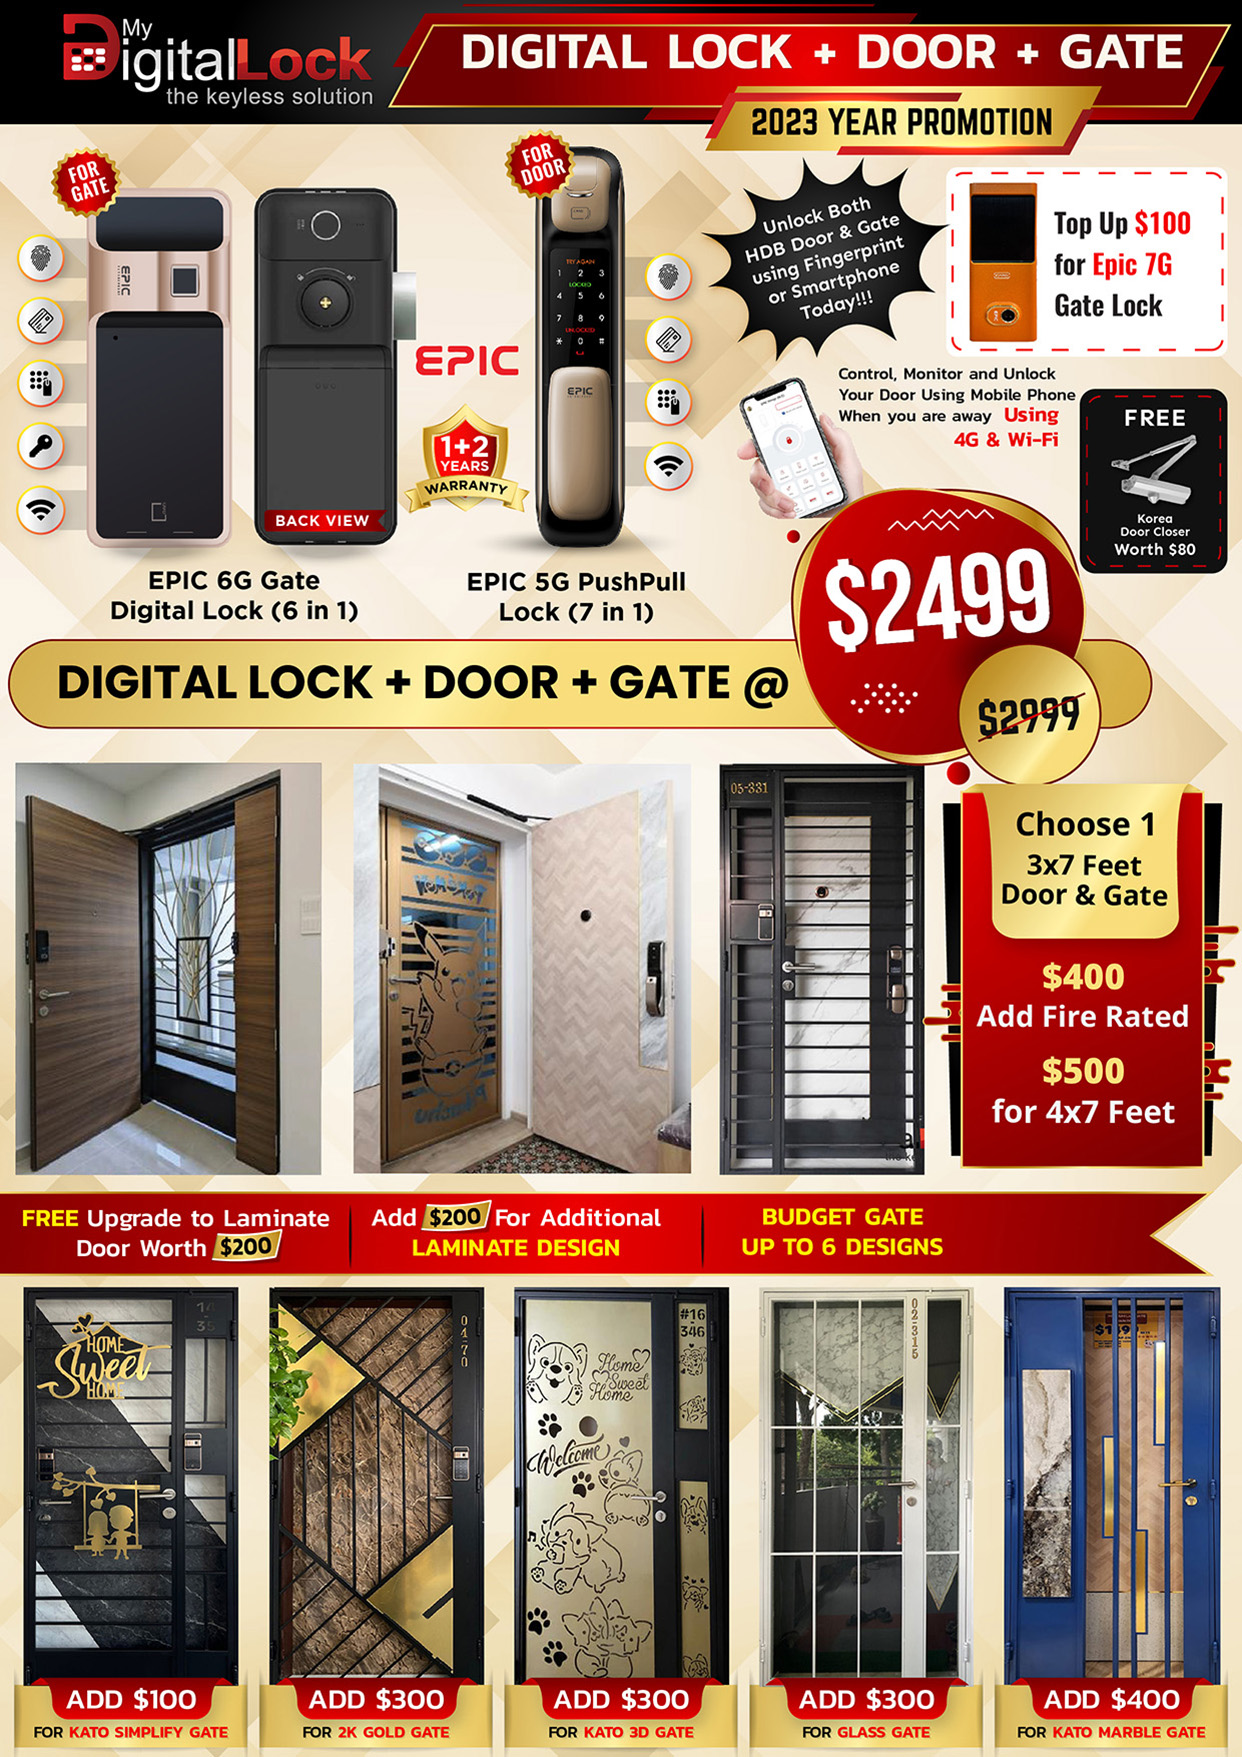 epic-6g-gate-digital-lock-6in1-and-epic-5g-push-pull-lock-5in1